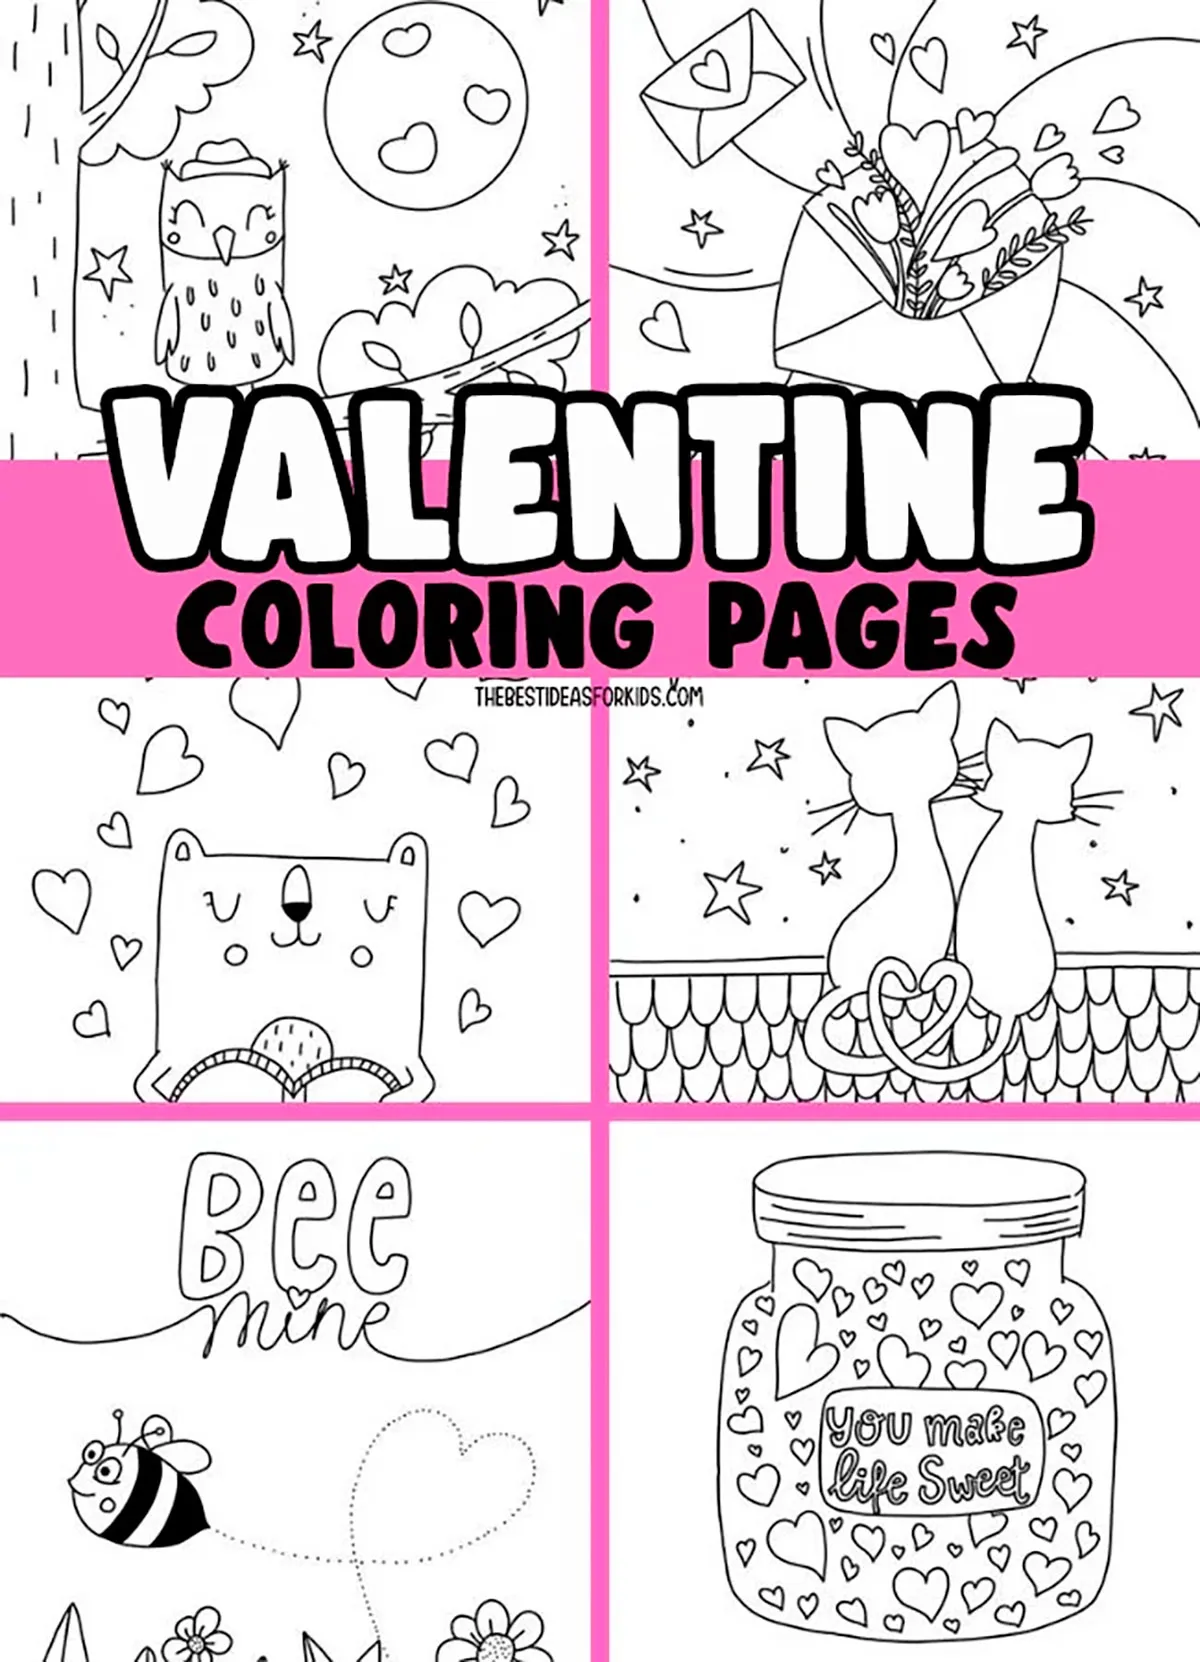 Valentine-Coloring-Pages-for-Kids